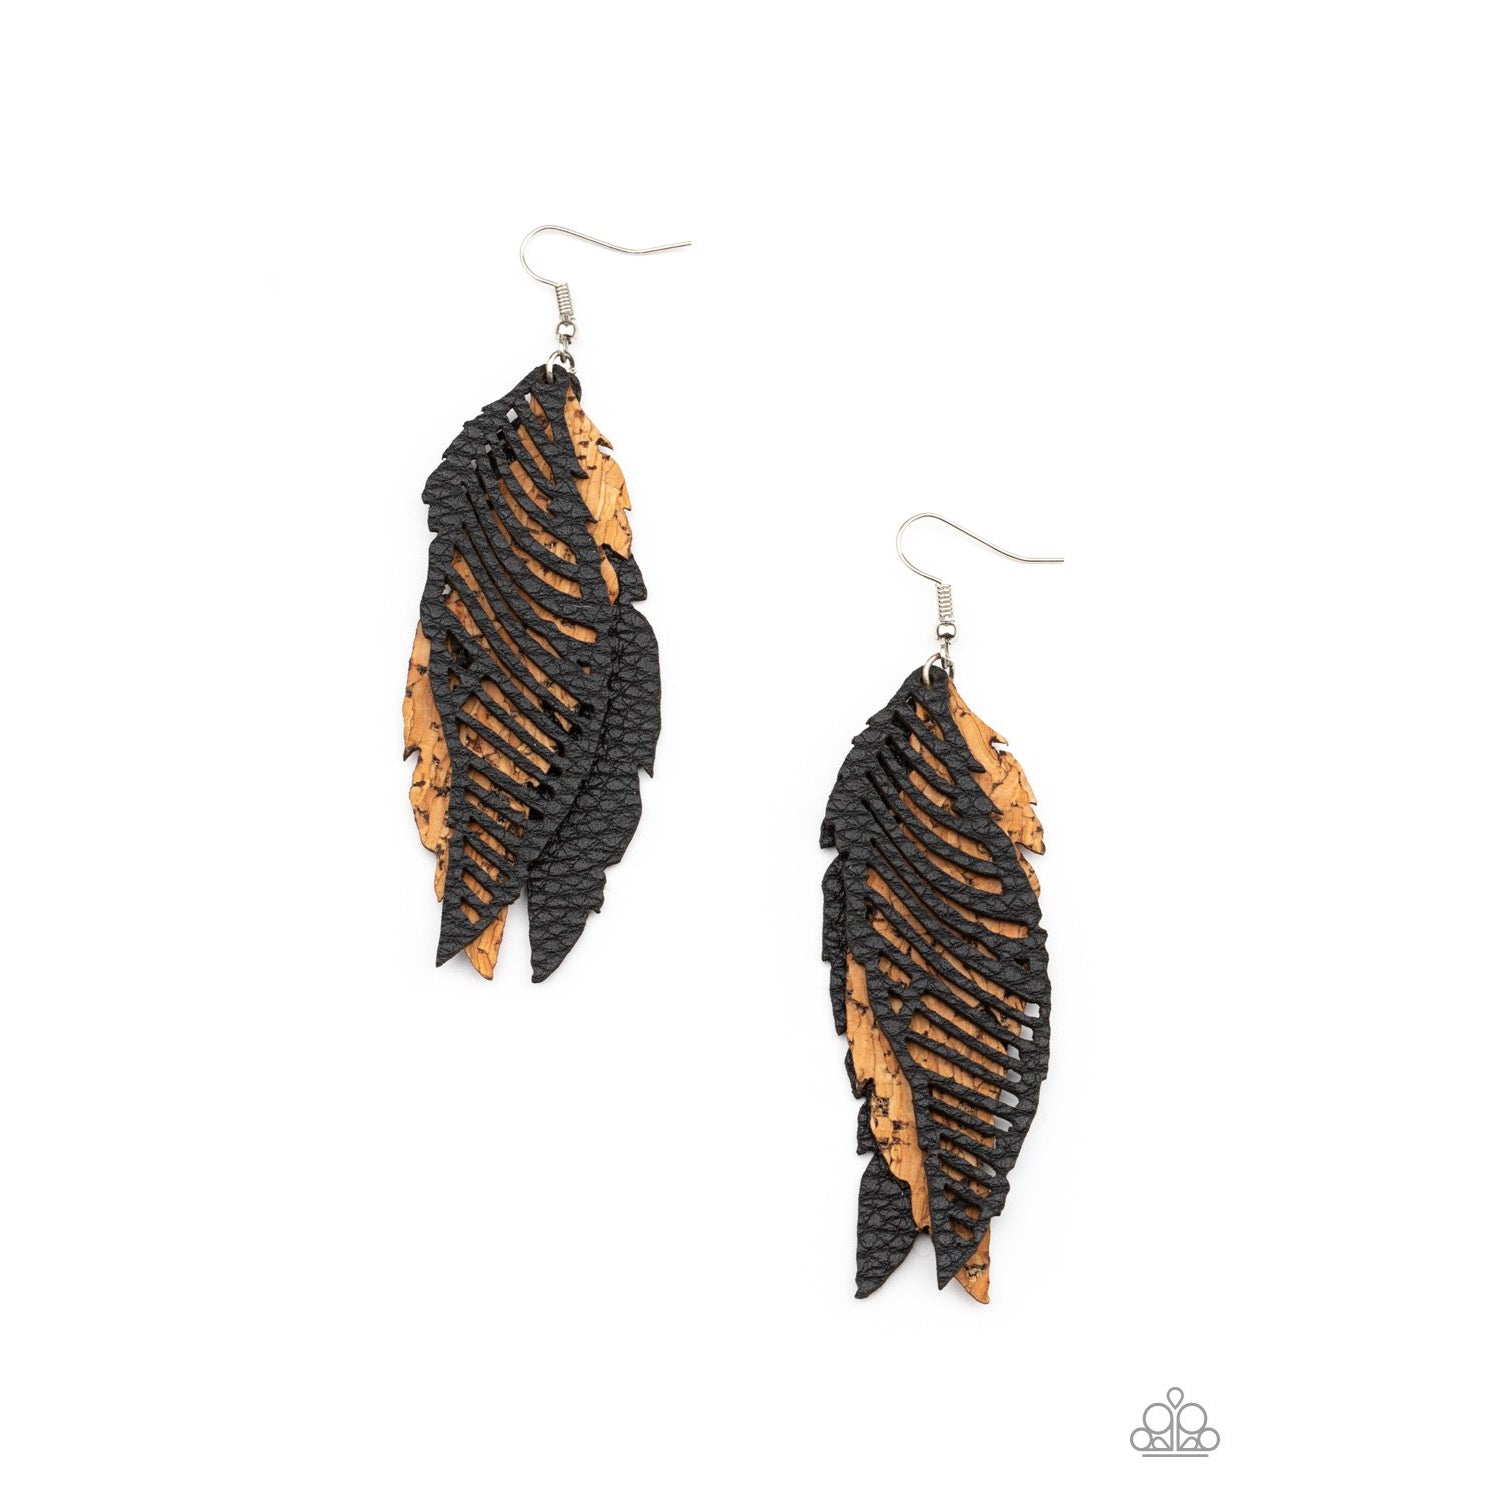 WINGING Off The Hook - Black and Cork Leather Earrings - Paparazzi Accessories - GlaMarous Titi Jewels